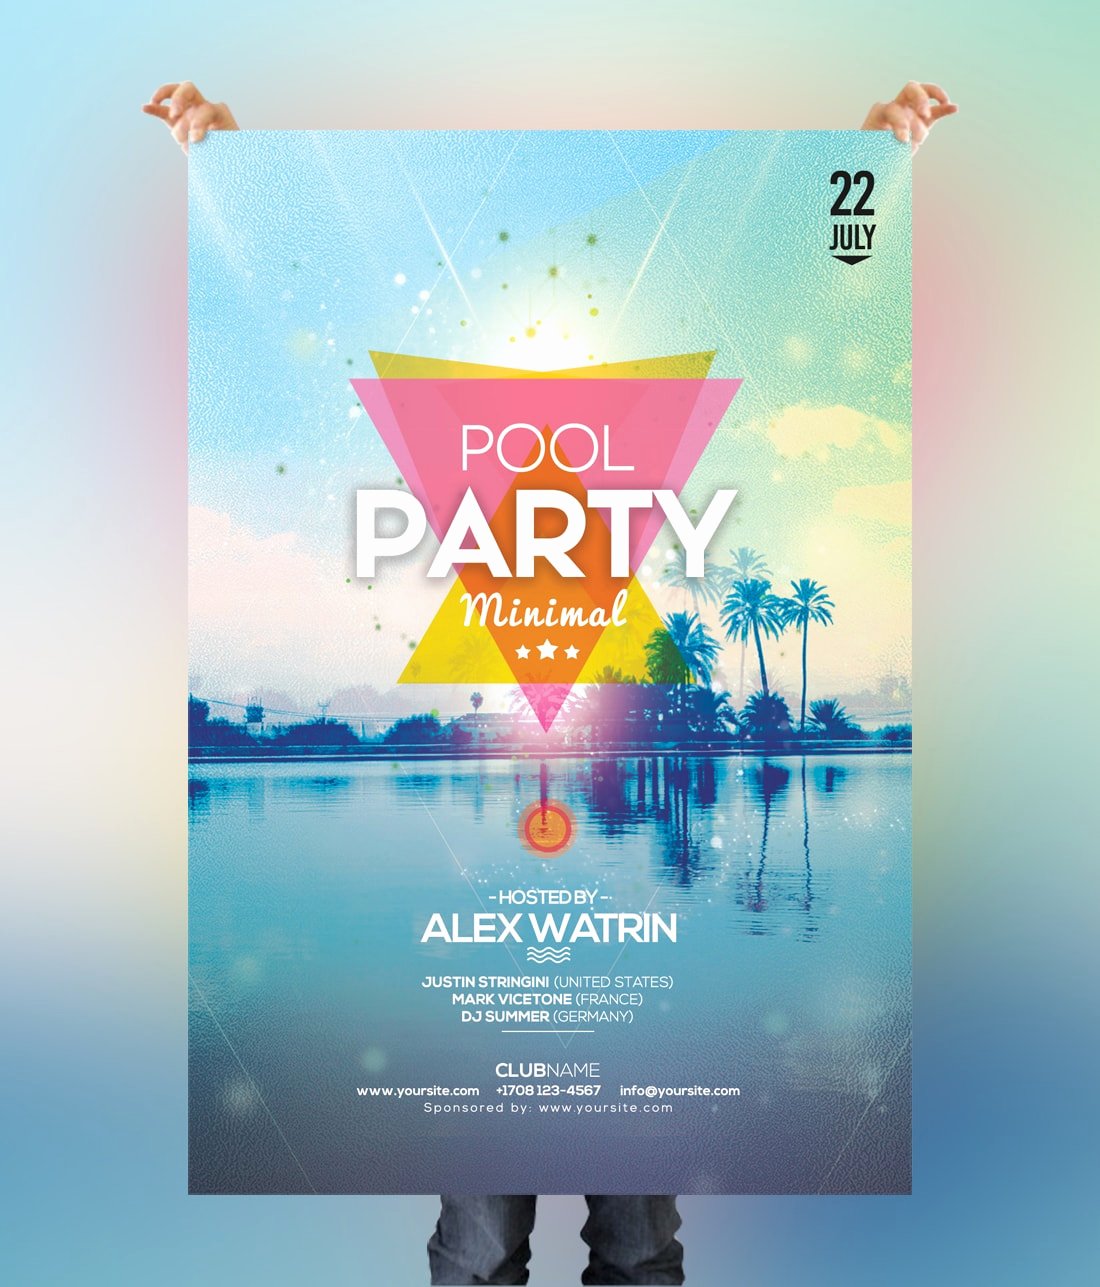 Pool Party Flyers Templates Beautiful Pool Party Free Summer Psd Flyer Template Psdflyer